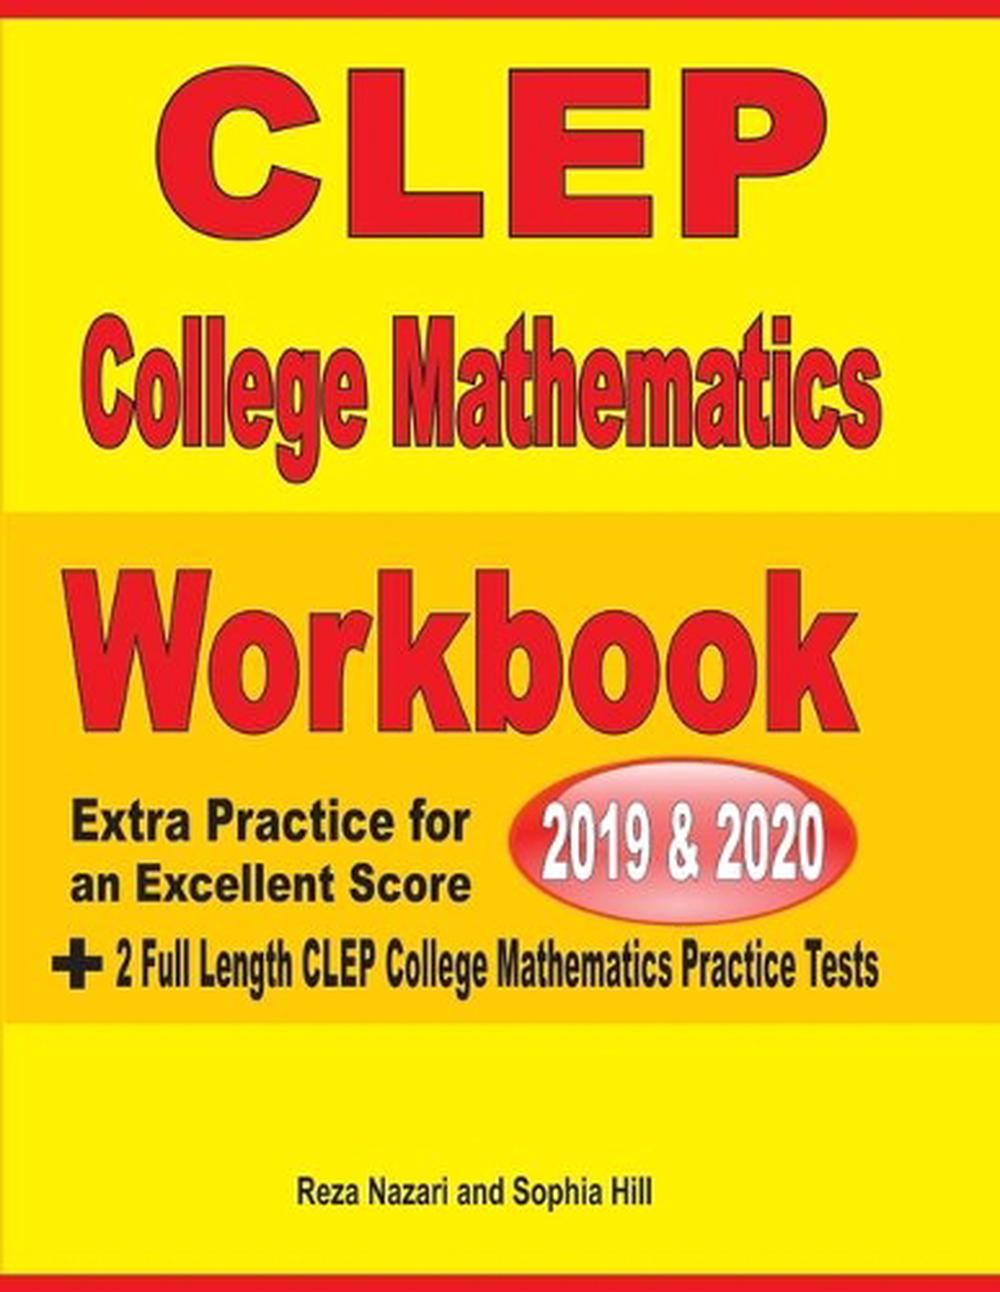 clep-college-mathematics-workbook-2019-2020-extra-practice-for-an